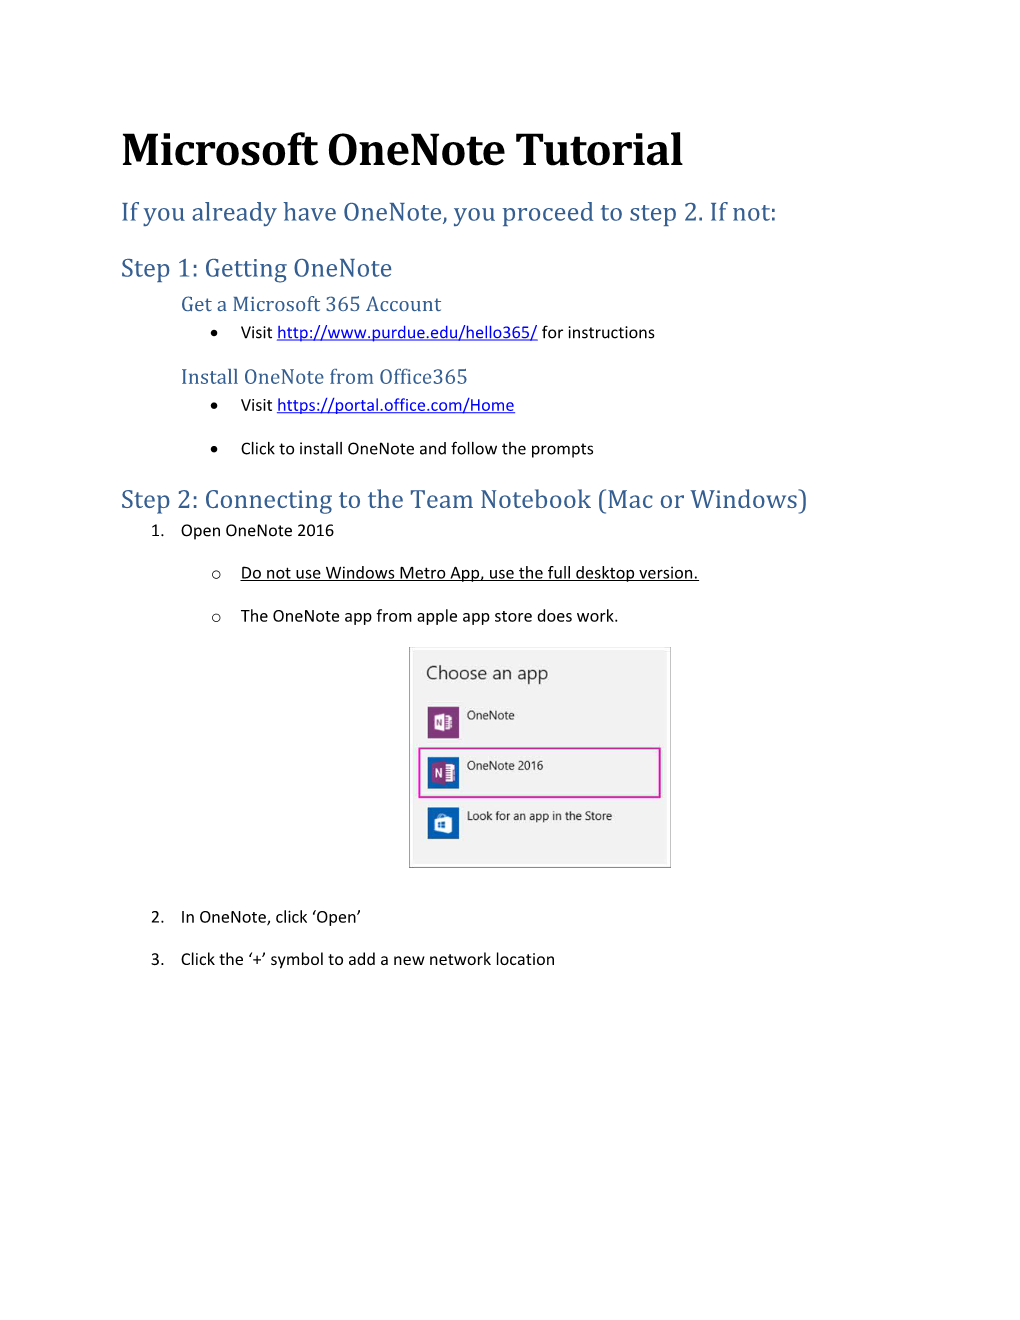 If You Already Have Onenote, You Proceed to Step 2. If Not